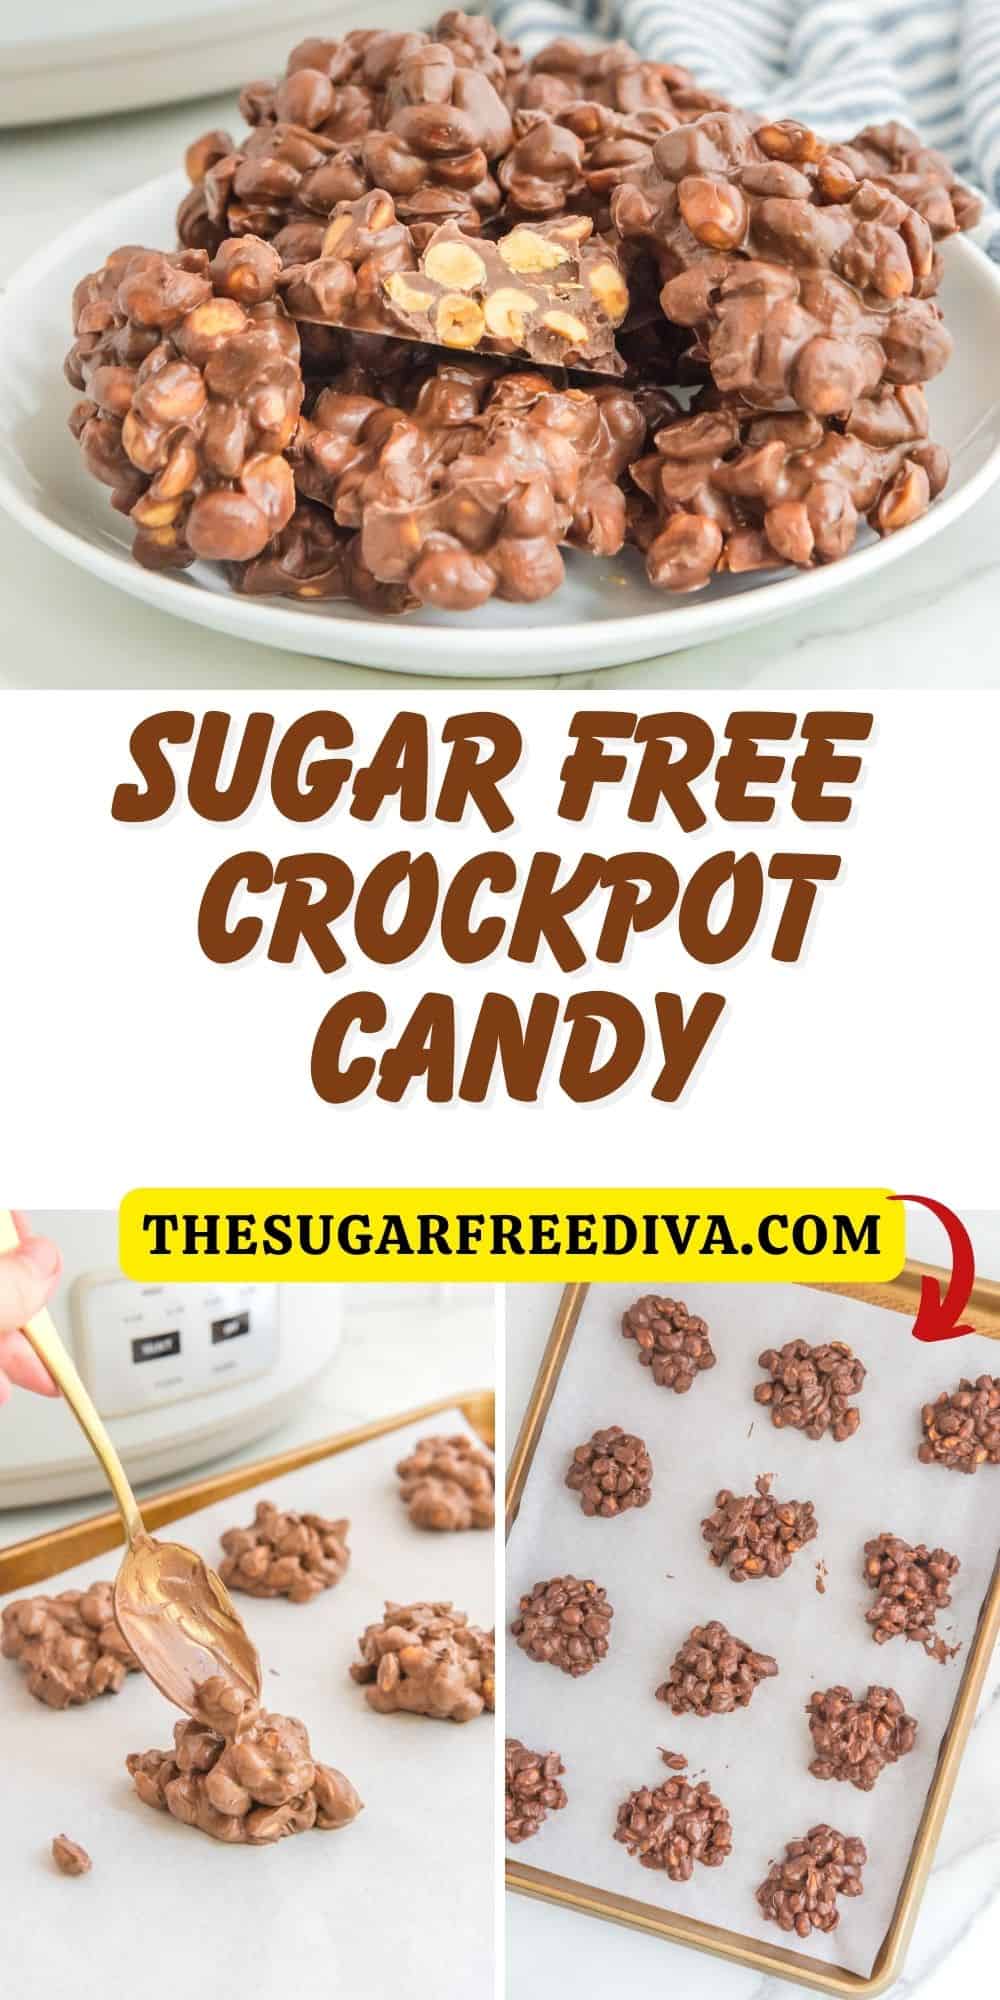 Sugar Free Crockpot Candy, an easy and delicious slow cooker snack or treat recipe made with 5 ingredients and no added sugar. low carb.